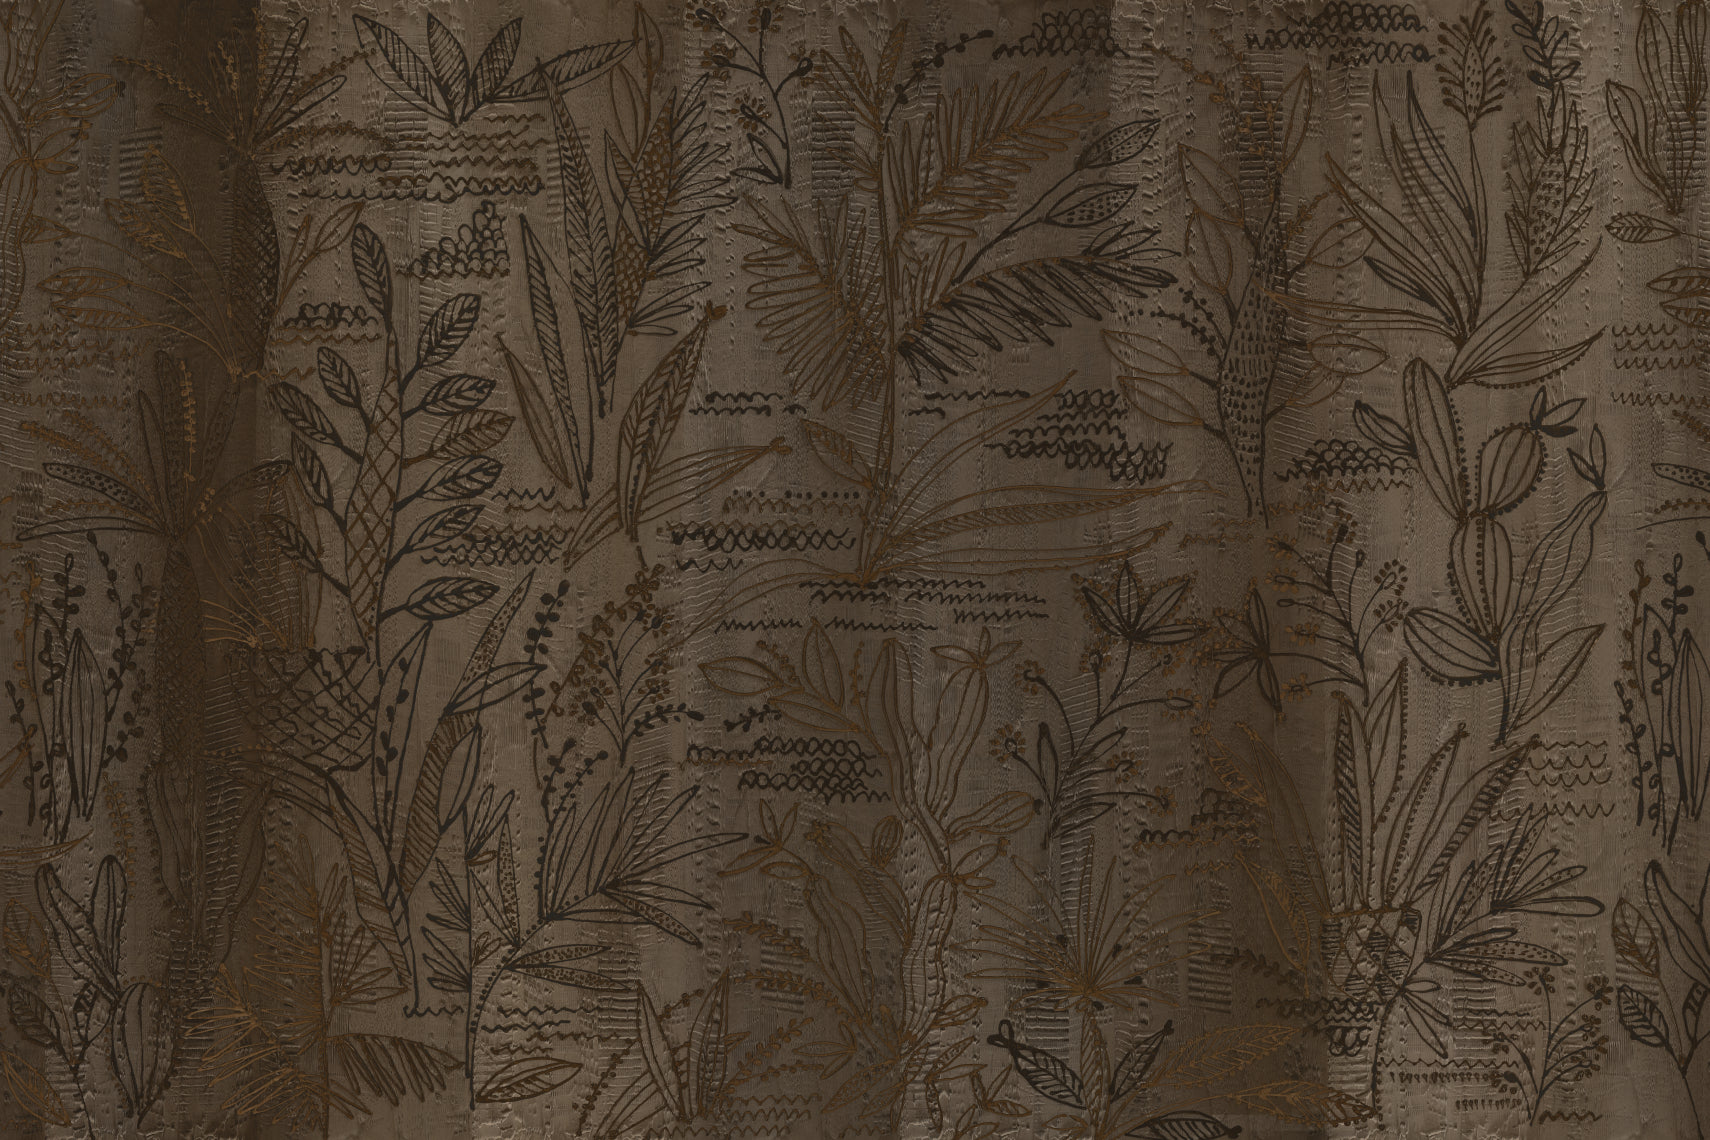 browm textured wallpaper with cocoa plants as a pattern 